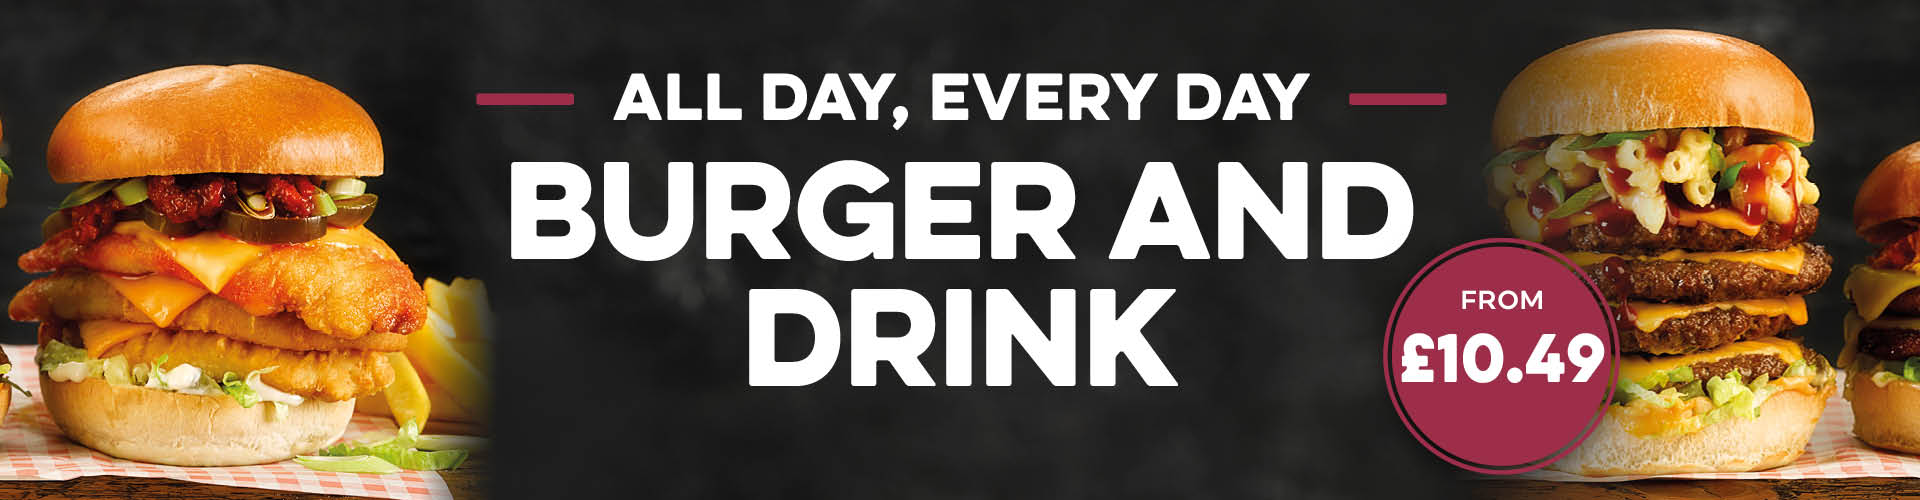 Enjoy a burger and a soft drink from just £10.49